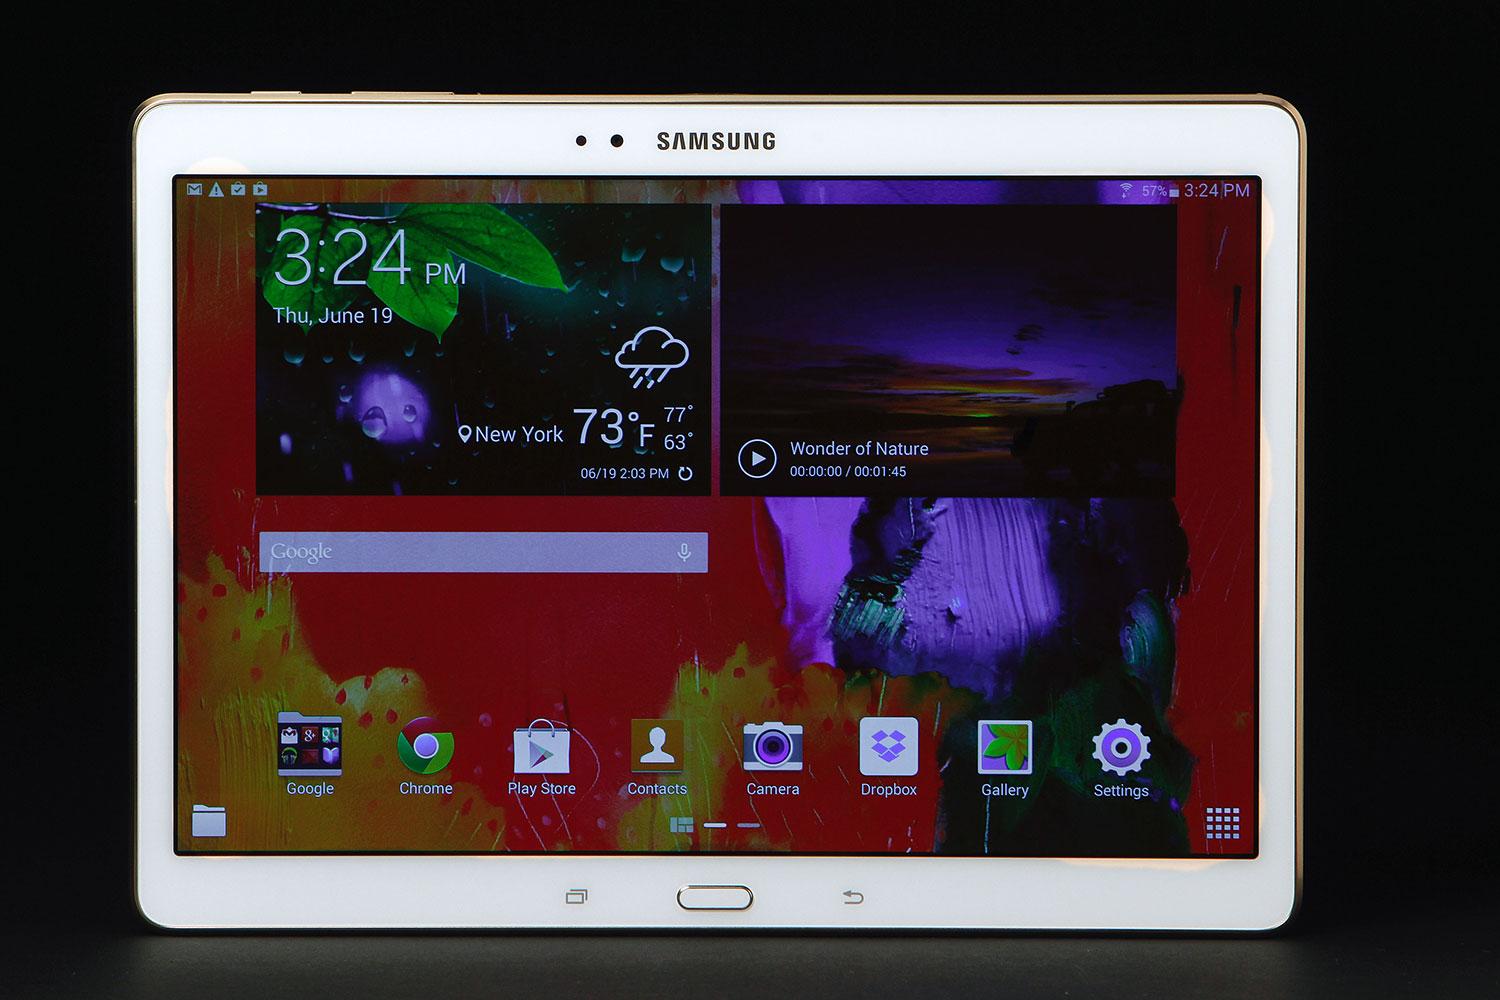 Samsung's Galaxy Tab S 10.5 & 8.4: Hands On with Samsung's 6.6